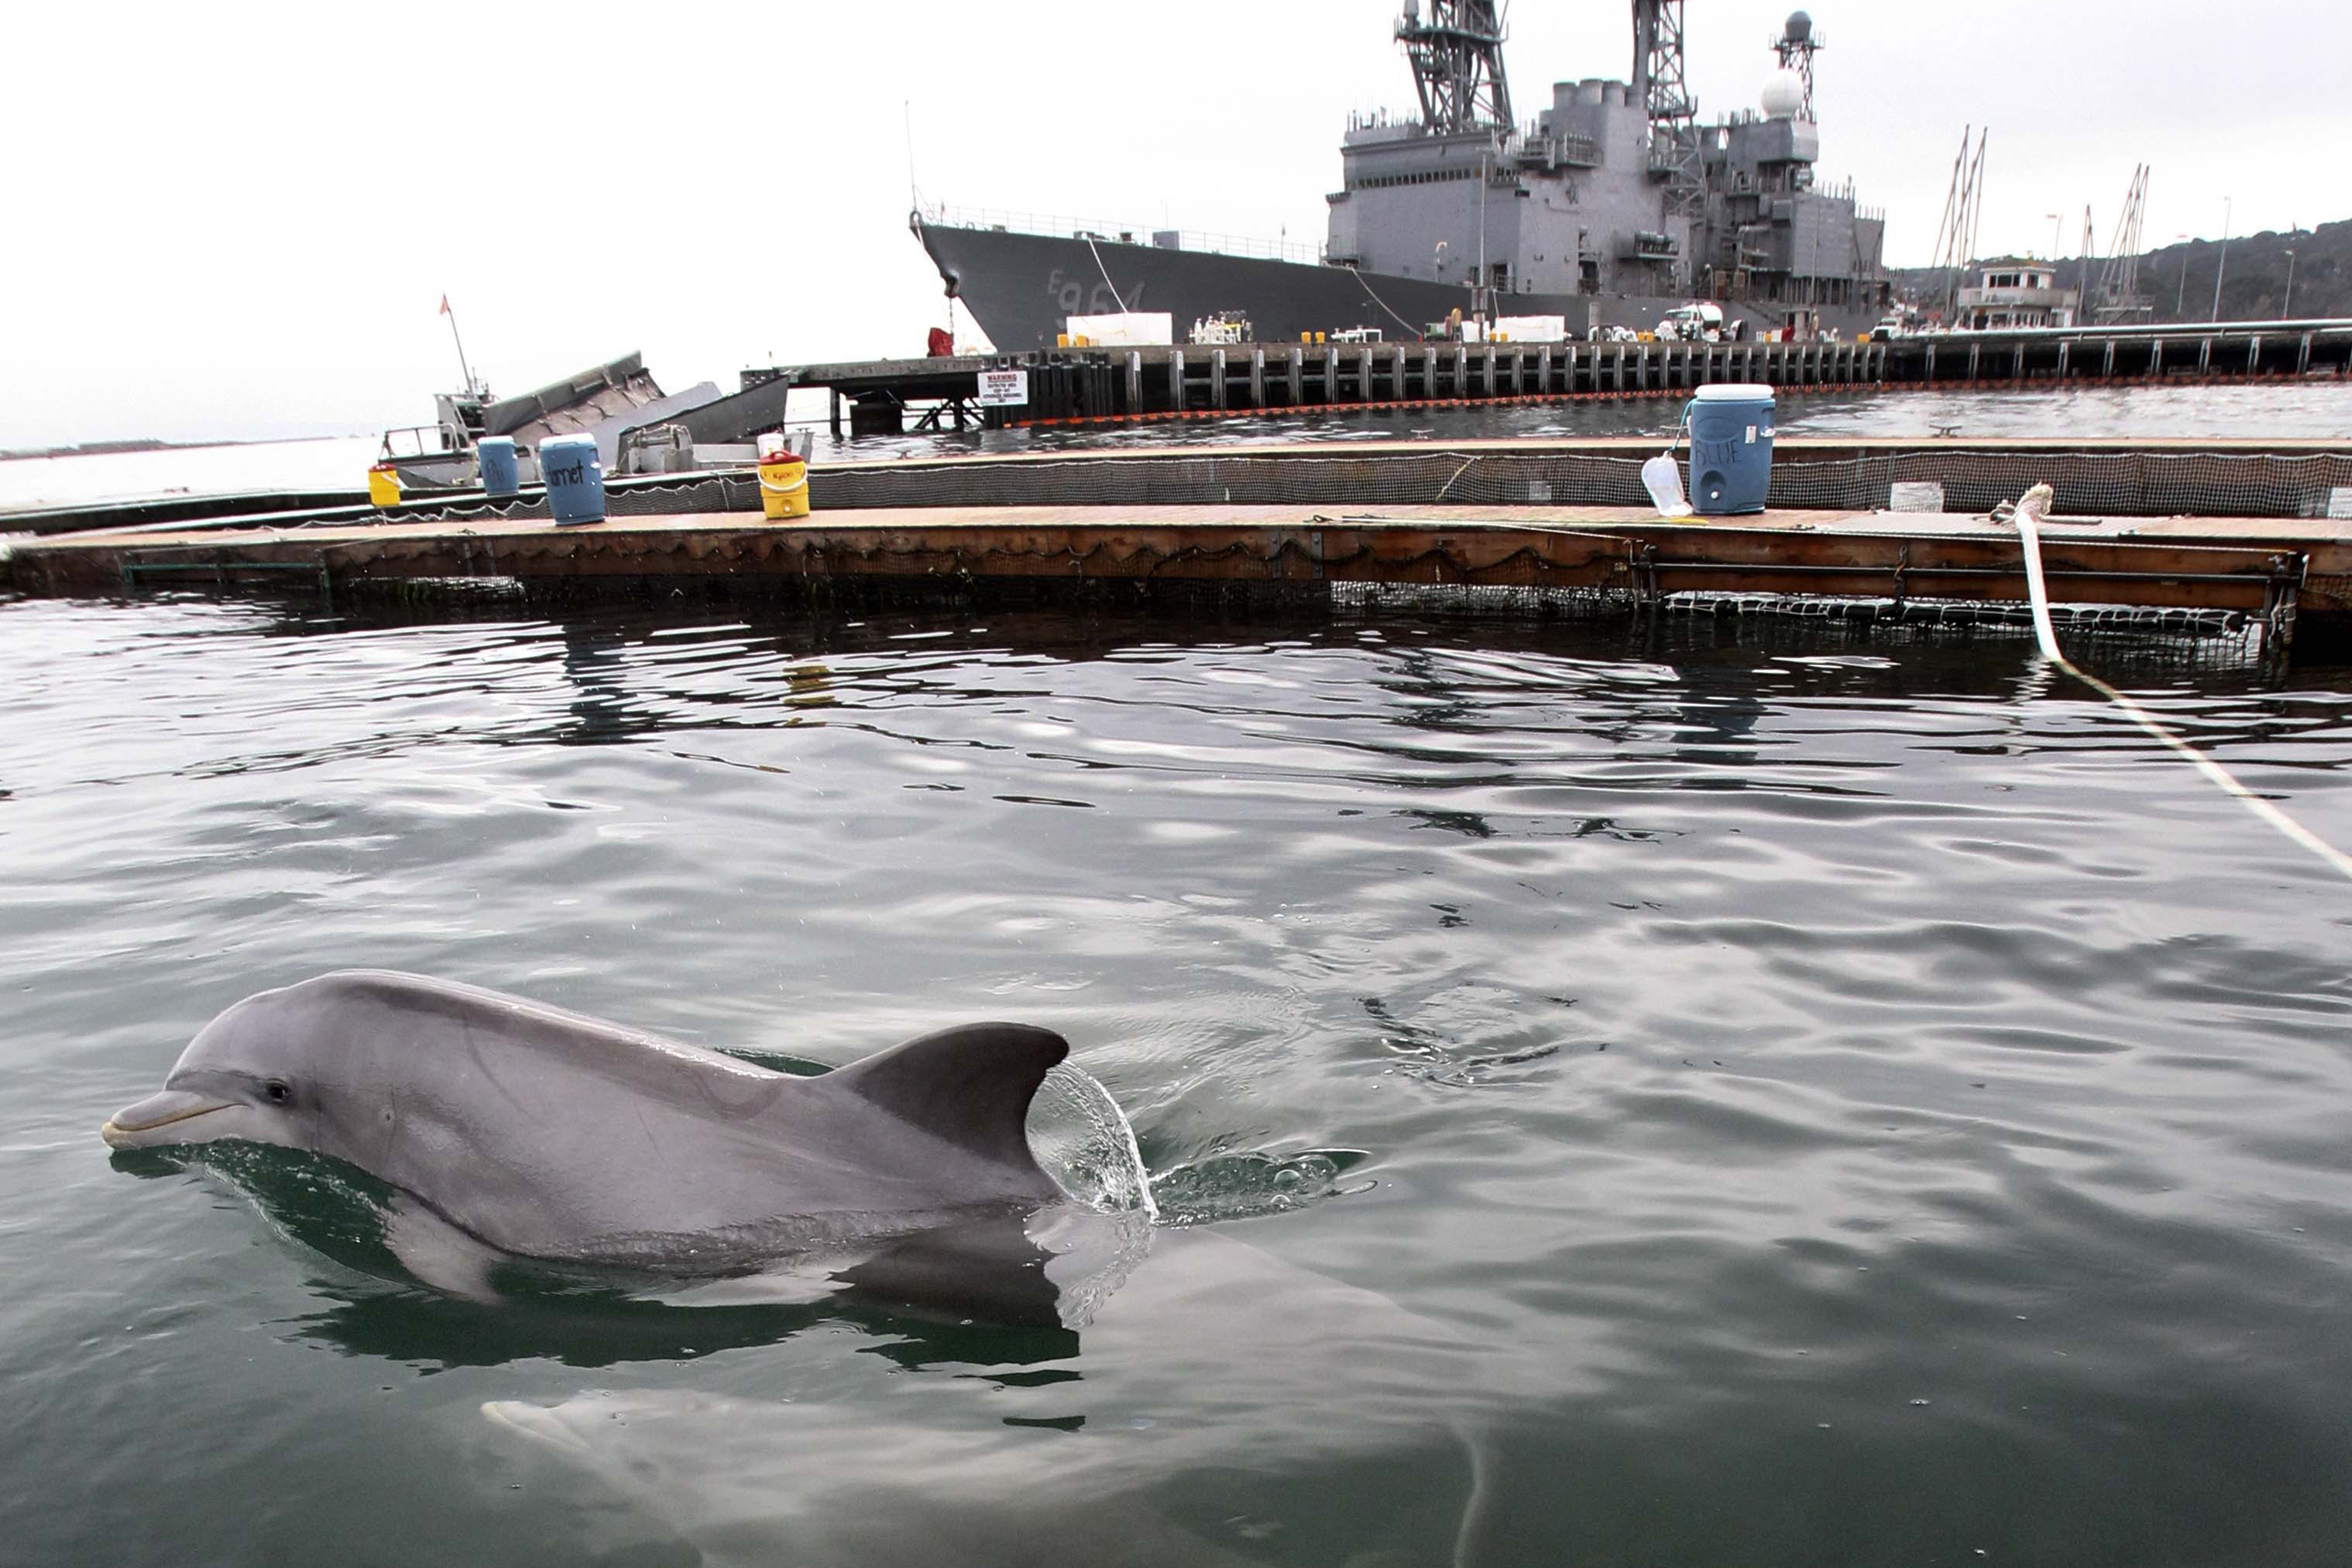 An adult and baby Atlantic bottlenose dolphin swim in one of the pens at the SPAWAR facility on Point Loma, Calif Nov. 29, 2012. (John Gibbins—AP)